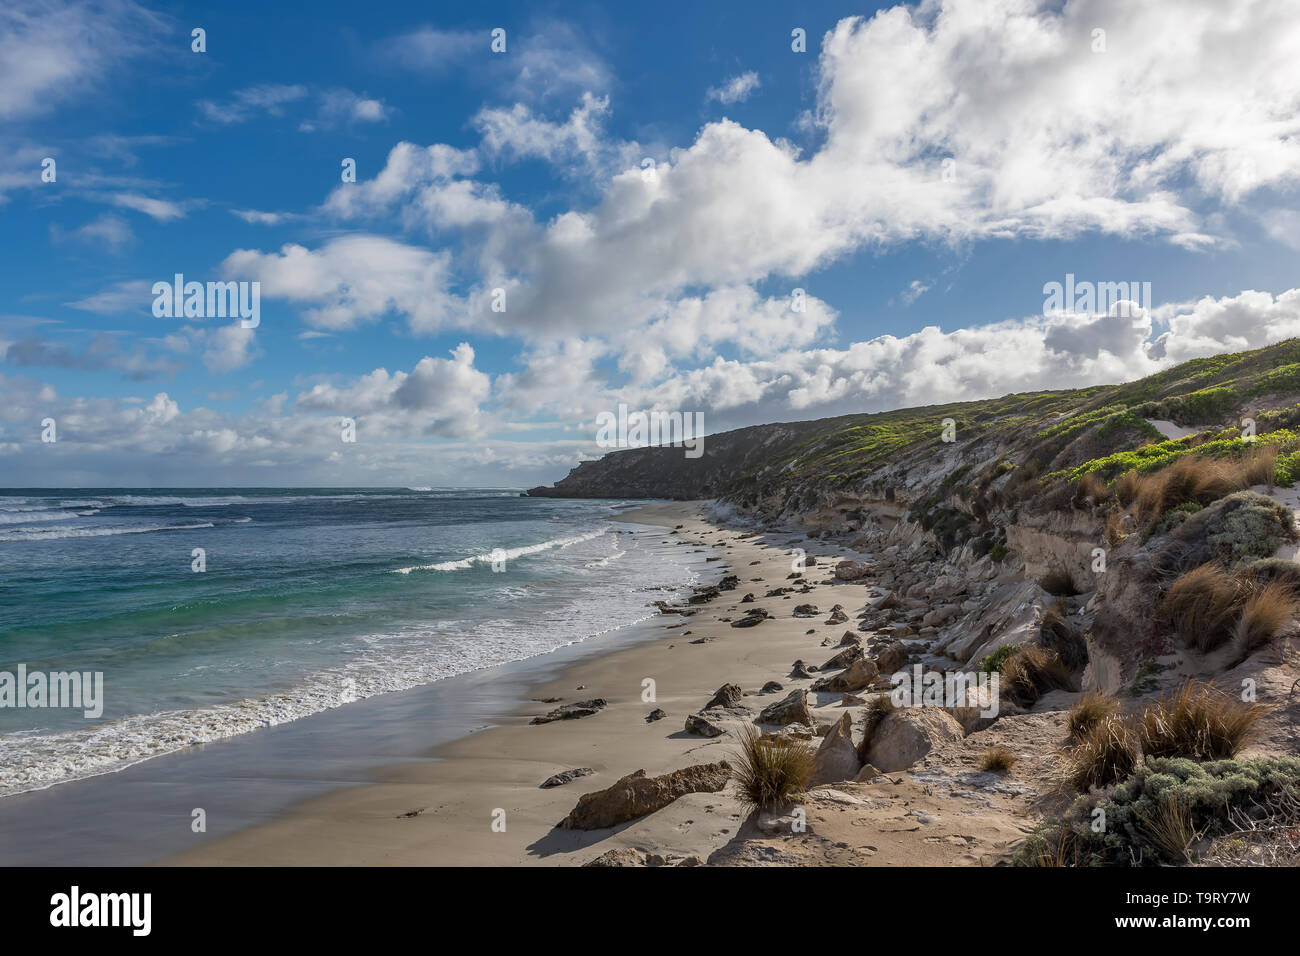 The beautiful Bales Beach against a blue sky with clouds on a windy day, Kangaroo Island, Southern Australia Stock Photo